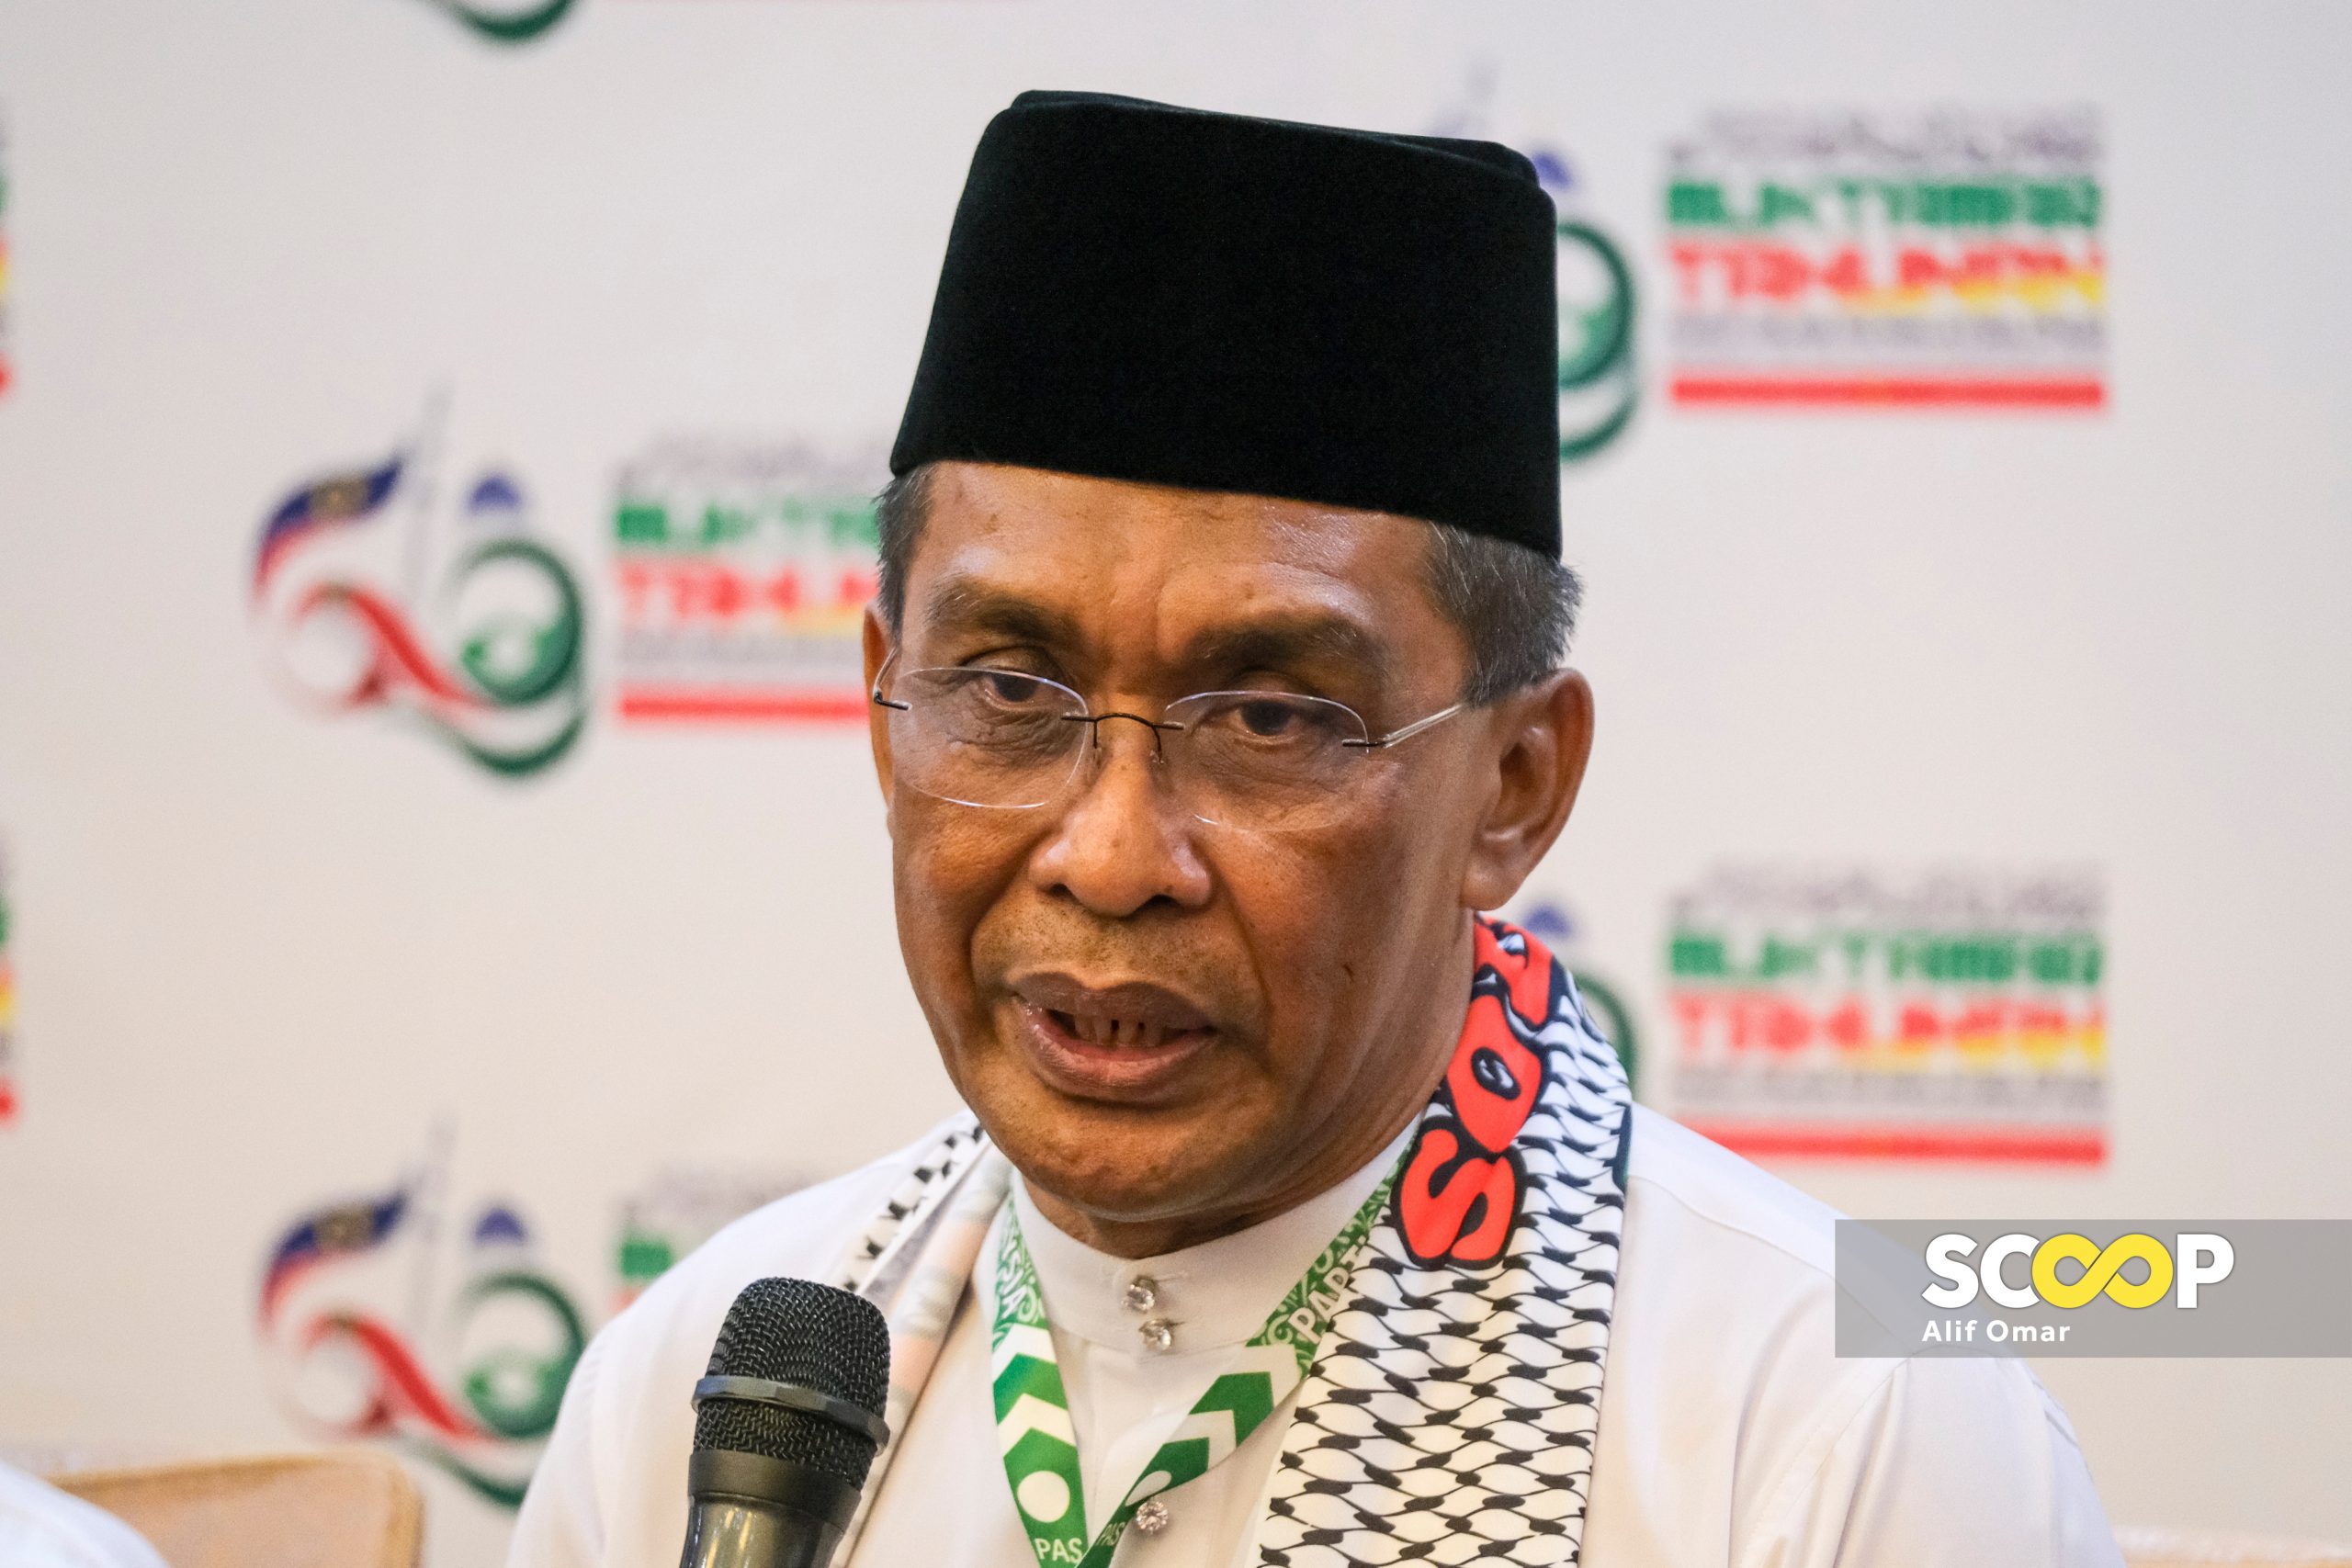 Handle matter with care: PAS to PKR reps urging review of Palestine programme